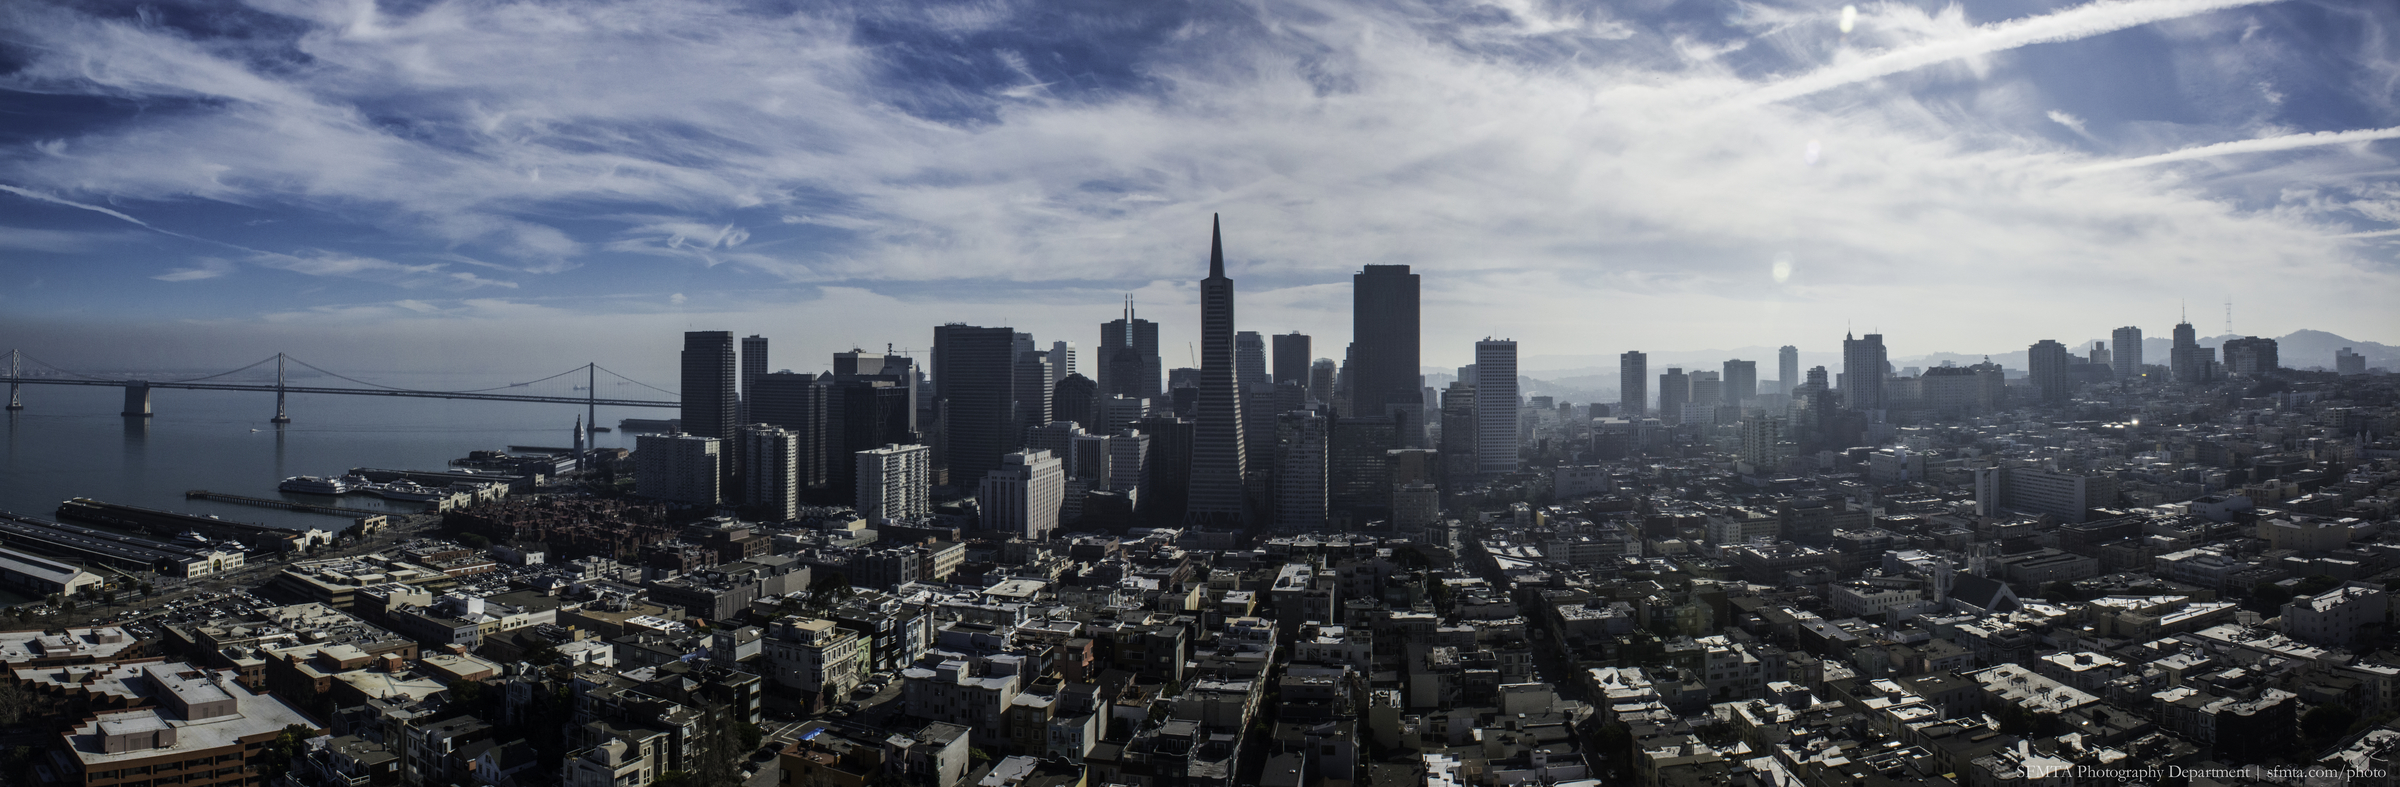 A panoramic view of the City from the top of Coit Tower